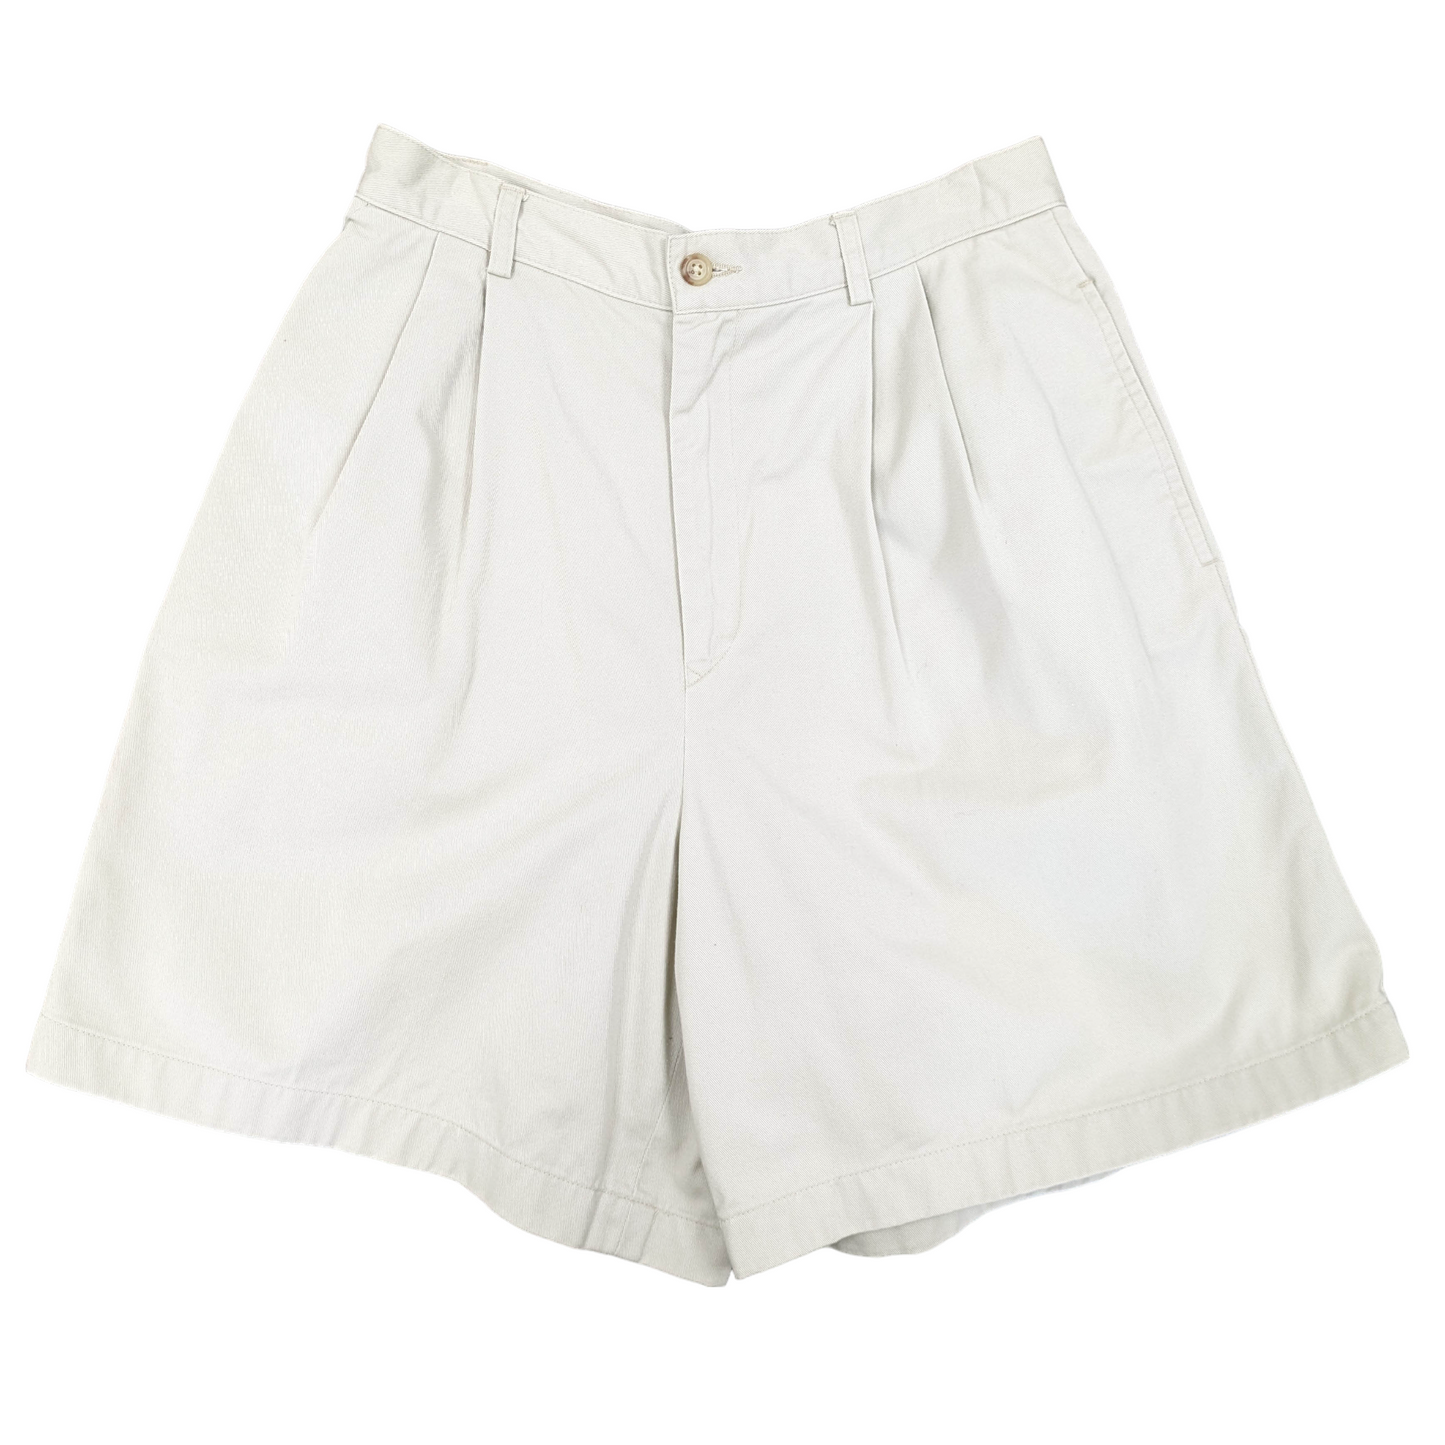 Women's 90s Polo Sport Pleated Shorts Size UK 10